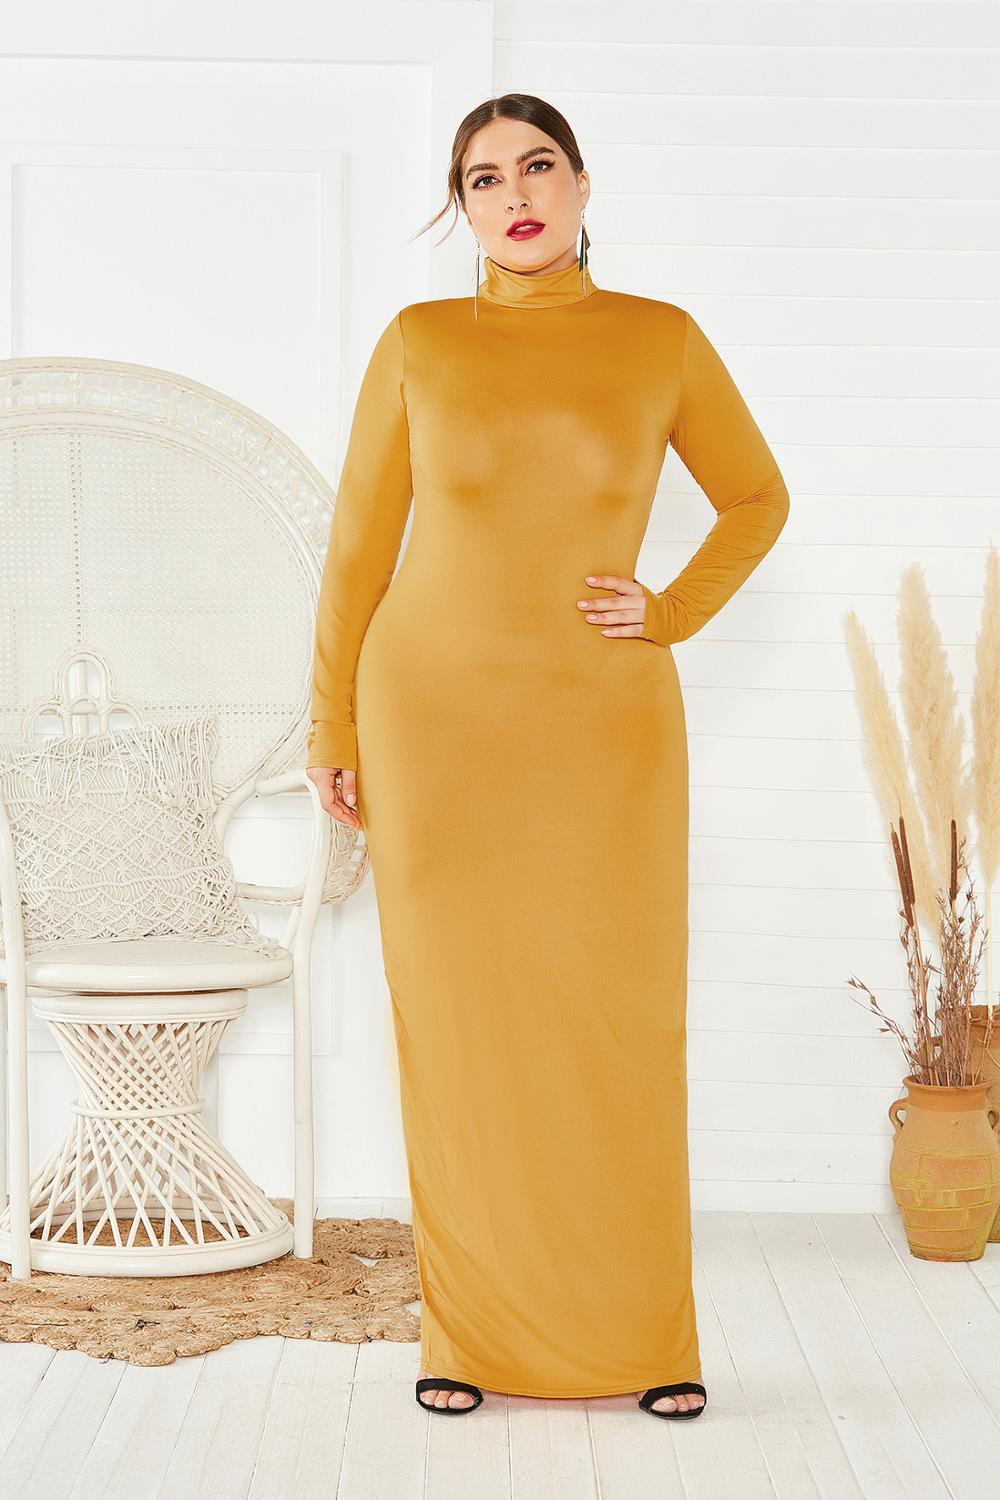 Spring Autumn Women Solid Casual Slim Bodycon Package Hip Maxi Dress Long Sleeve Turtleneck Stretchy Long Dresses Plus Size Robe